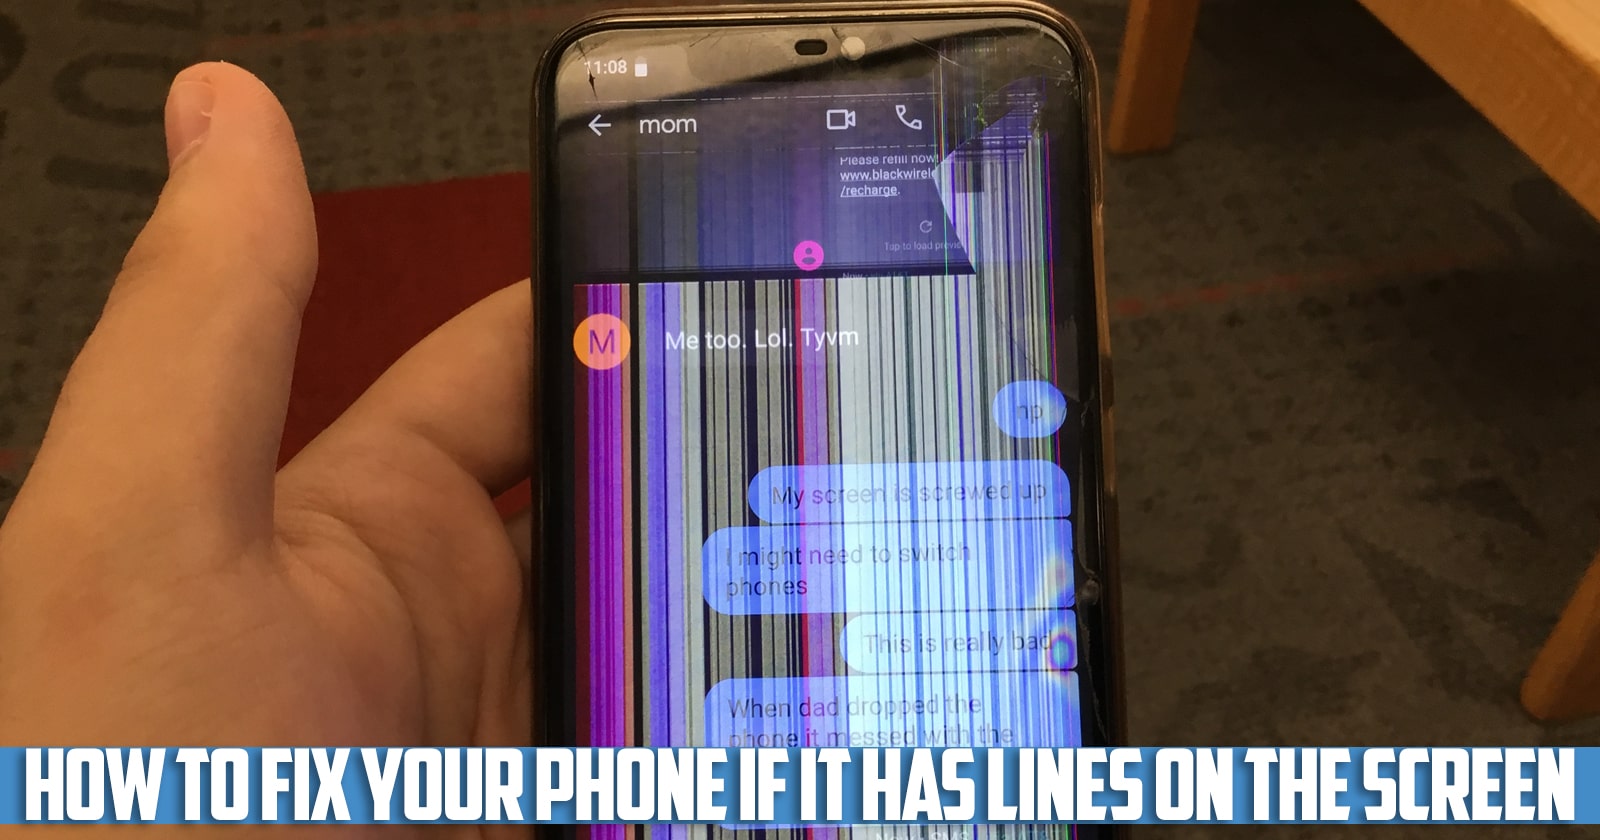 How to Fix Your Phone If It Has Lines on the Screen?